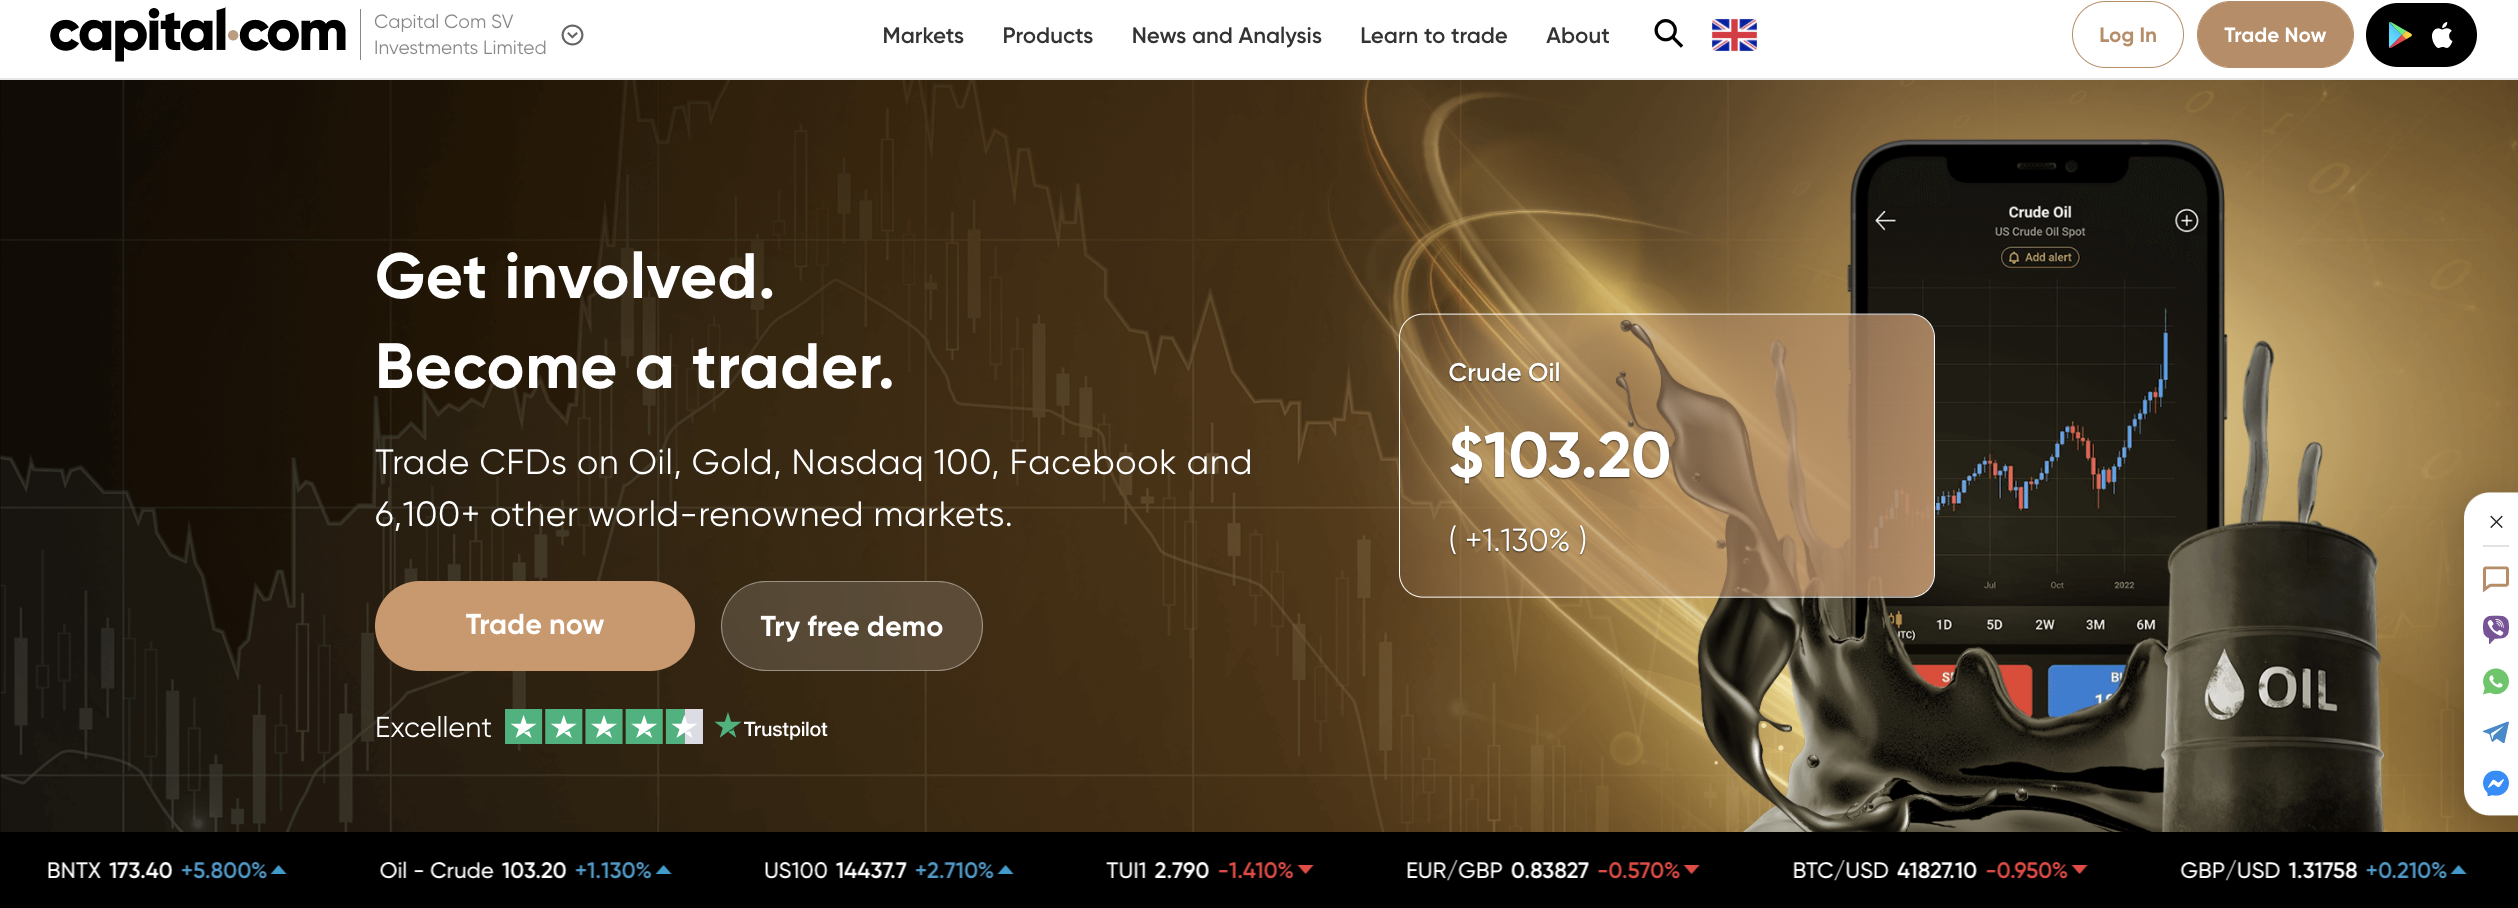 The official website of the forex broker Capital.com